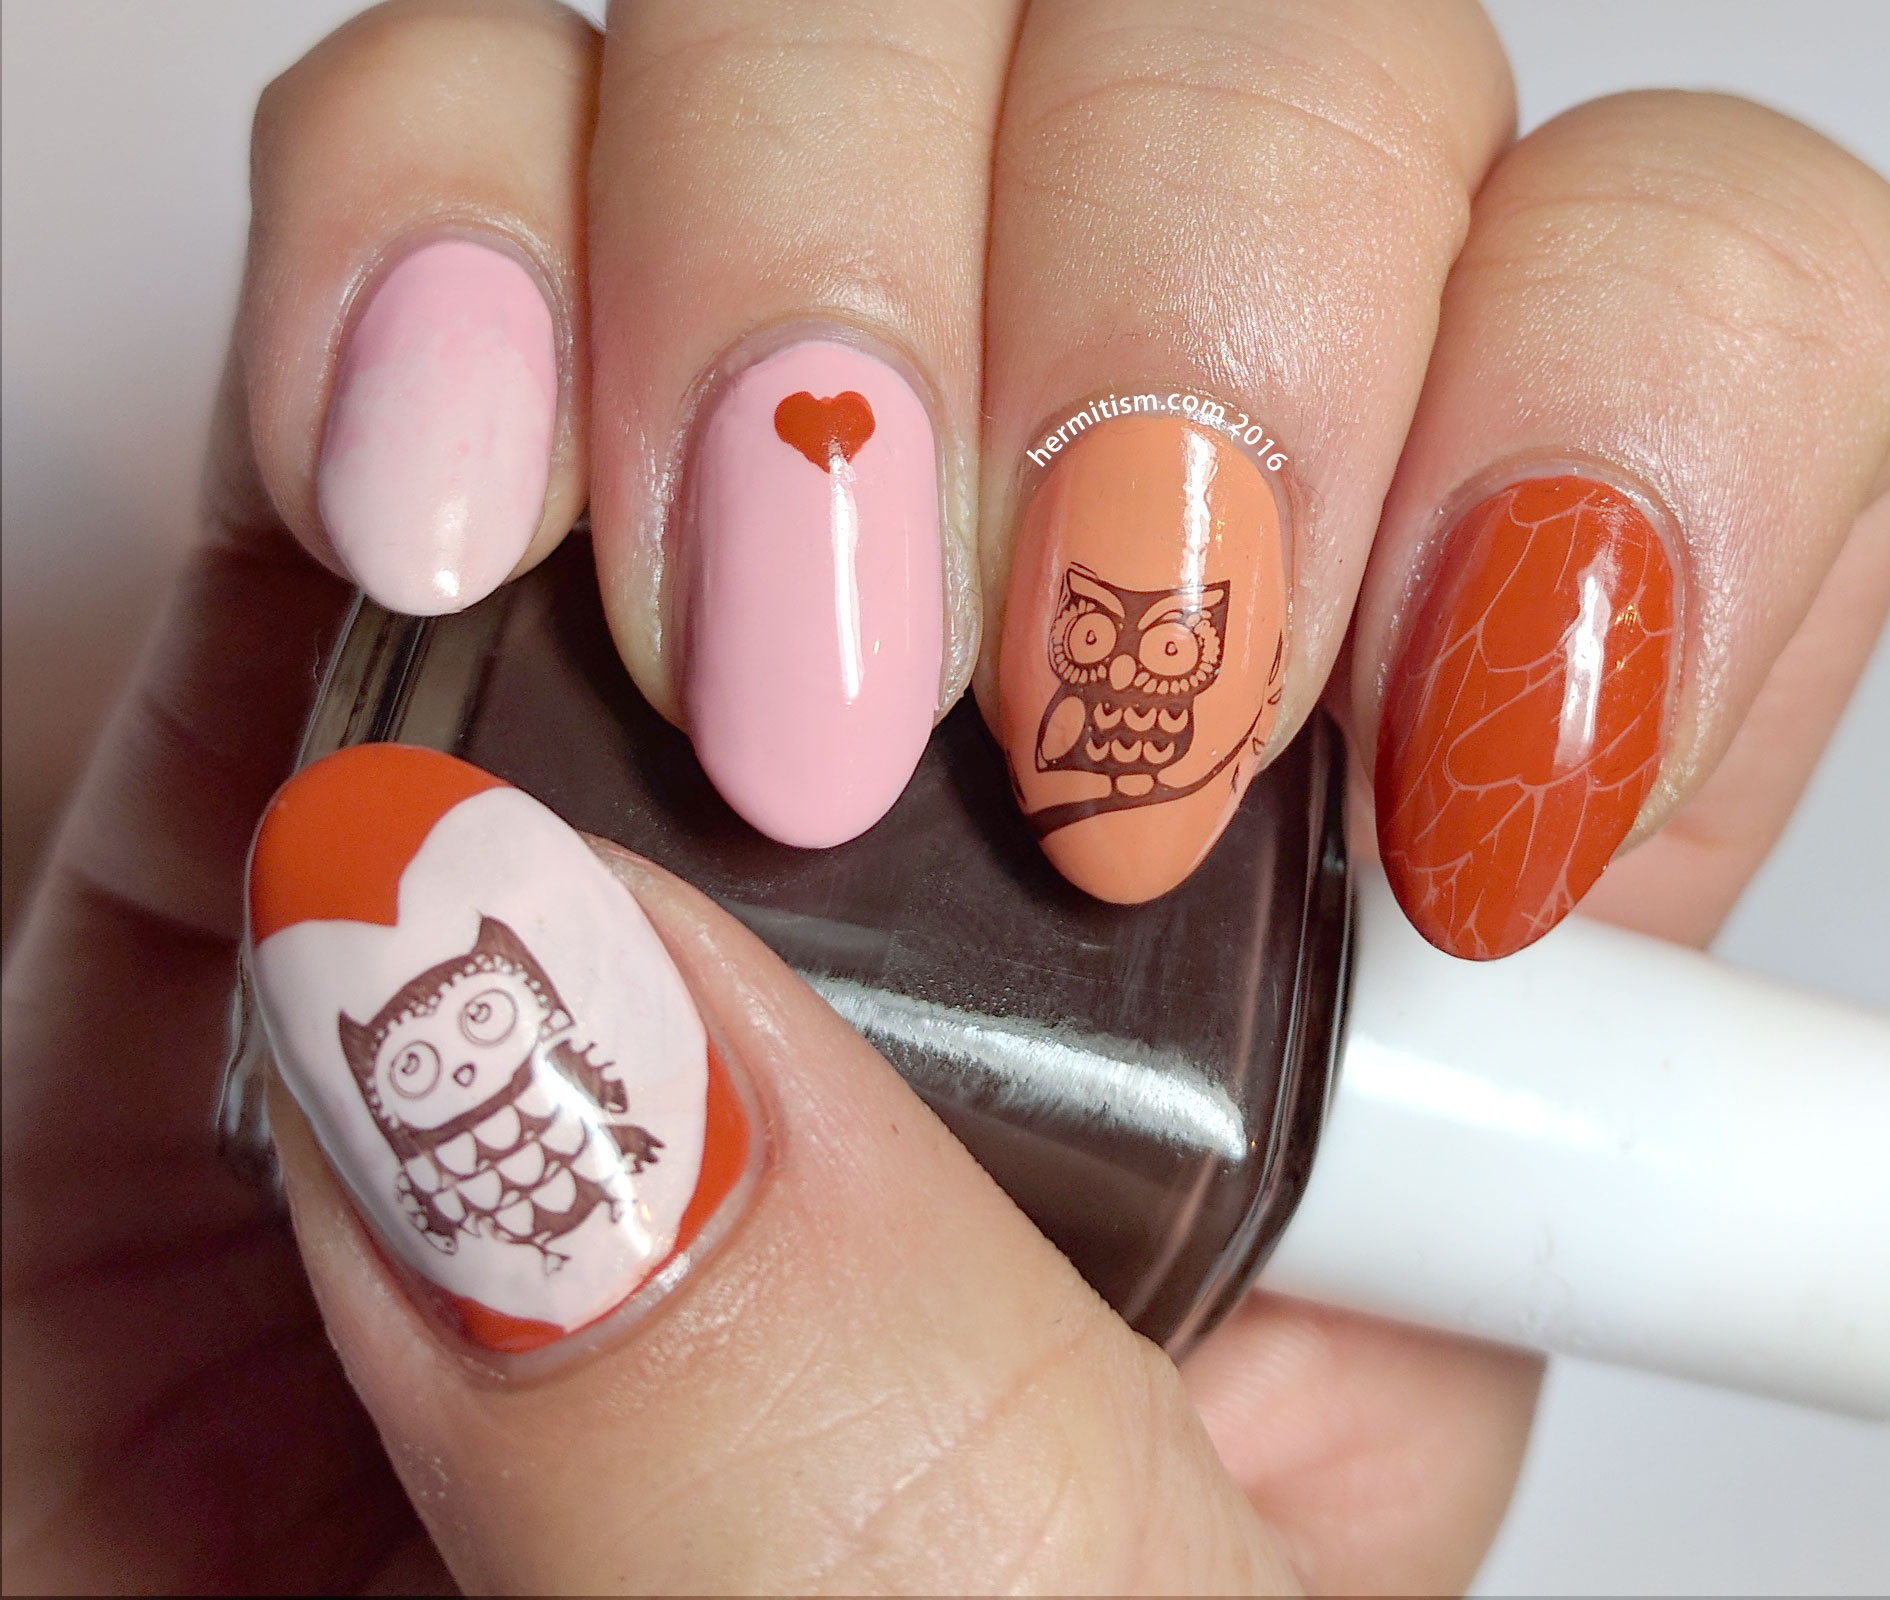 Y is for YOLO - ABC Nail Art Challenge - Hermit Werds